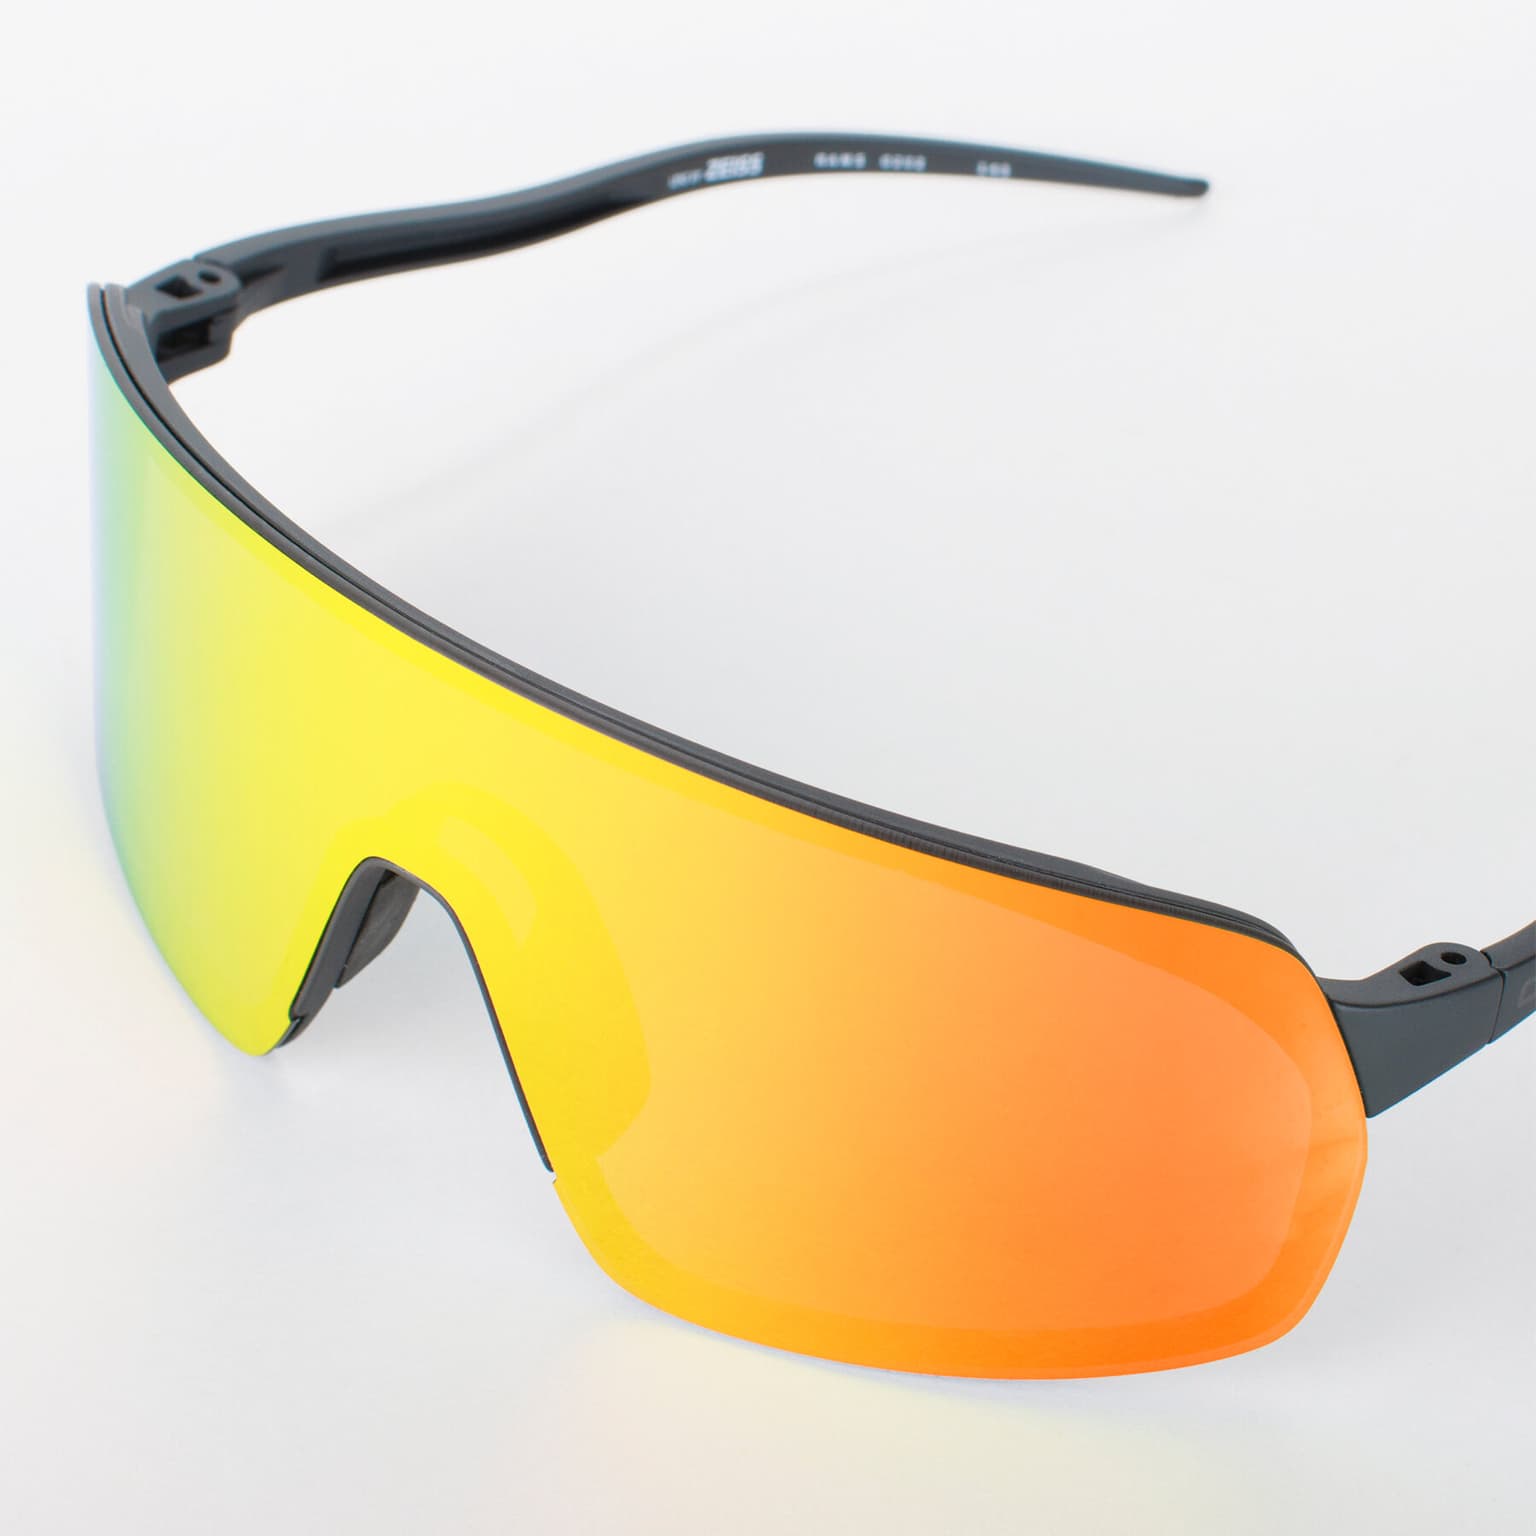 Pit Viper Pit Viper The Flip-Offs The Mystery Sportbrille 4